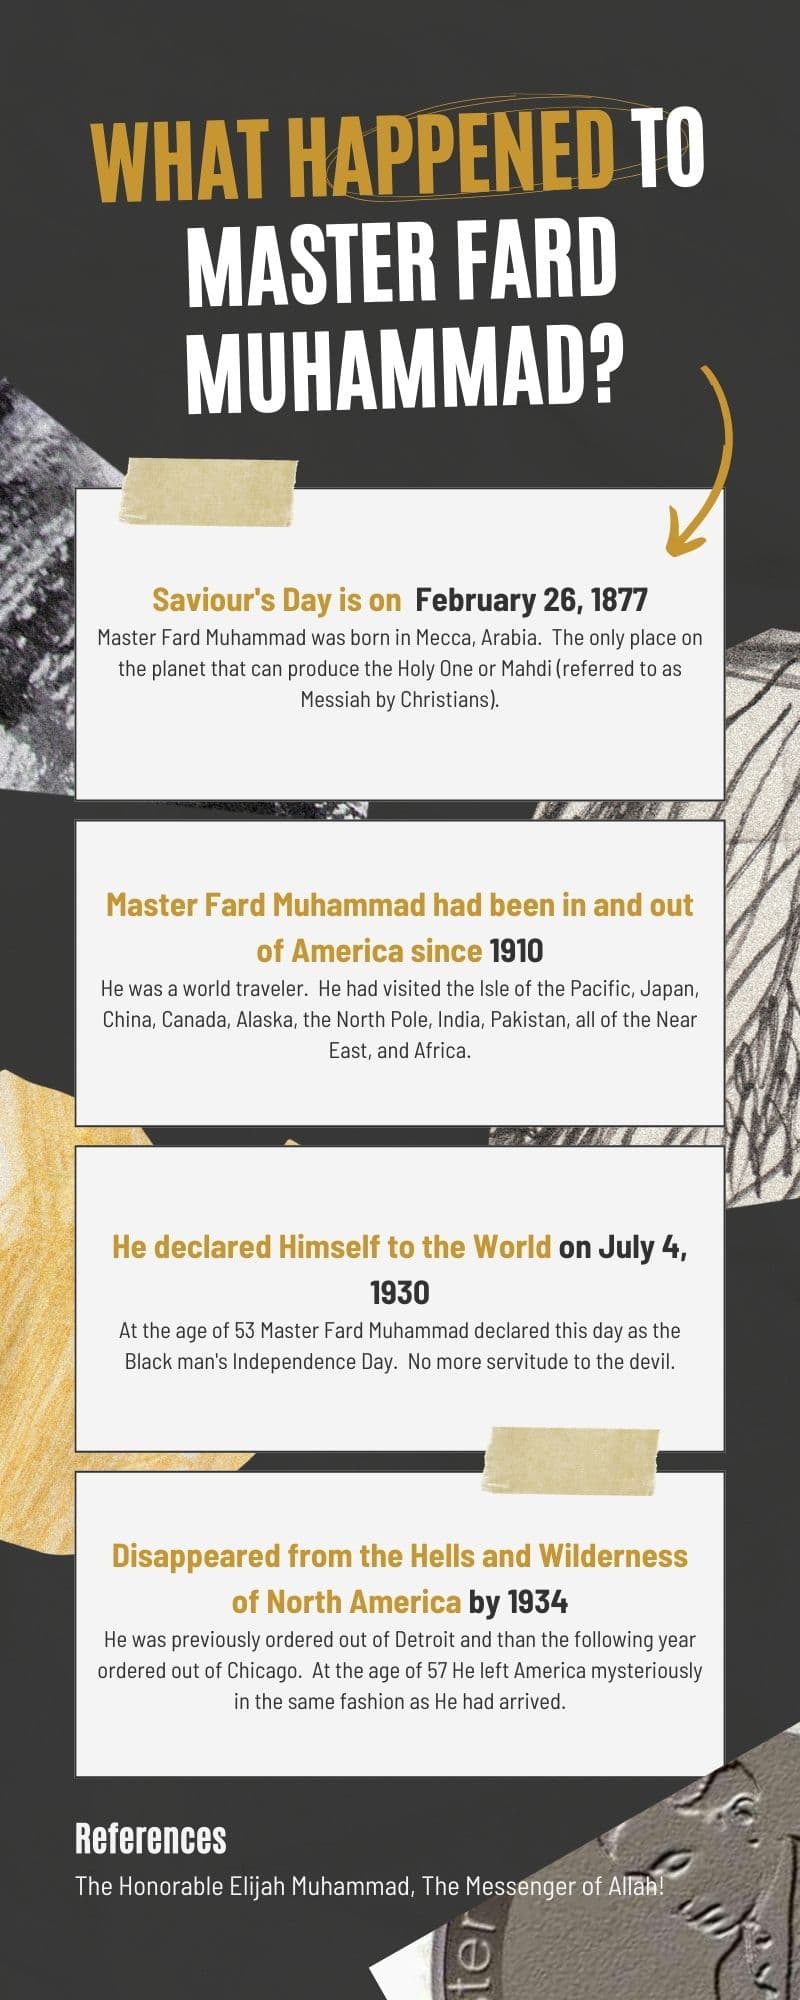 an infographic explaining what happened to master fard muhammad